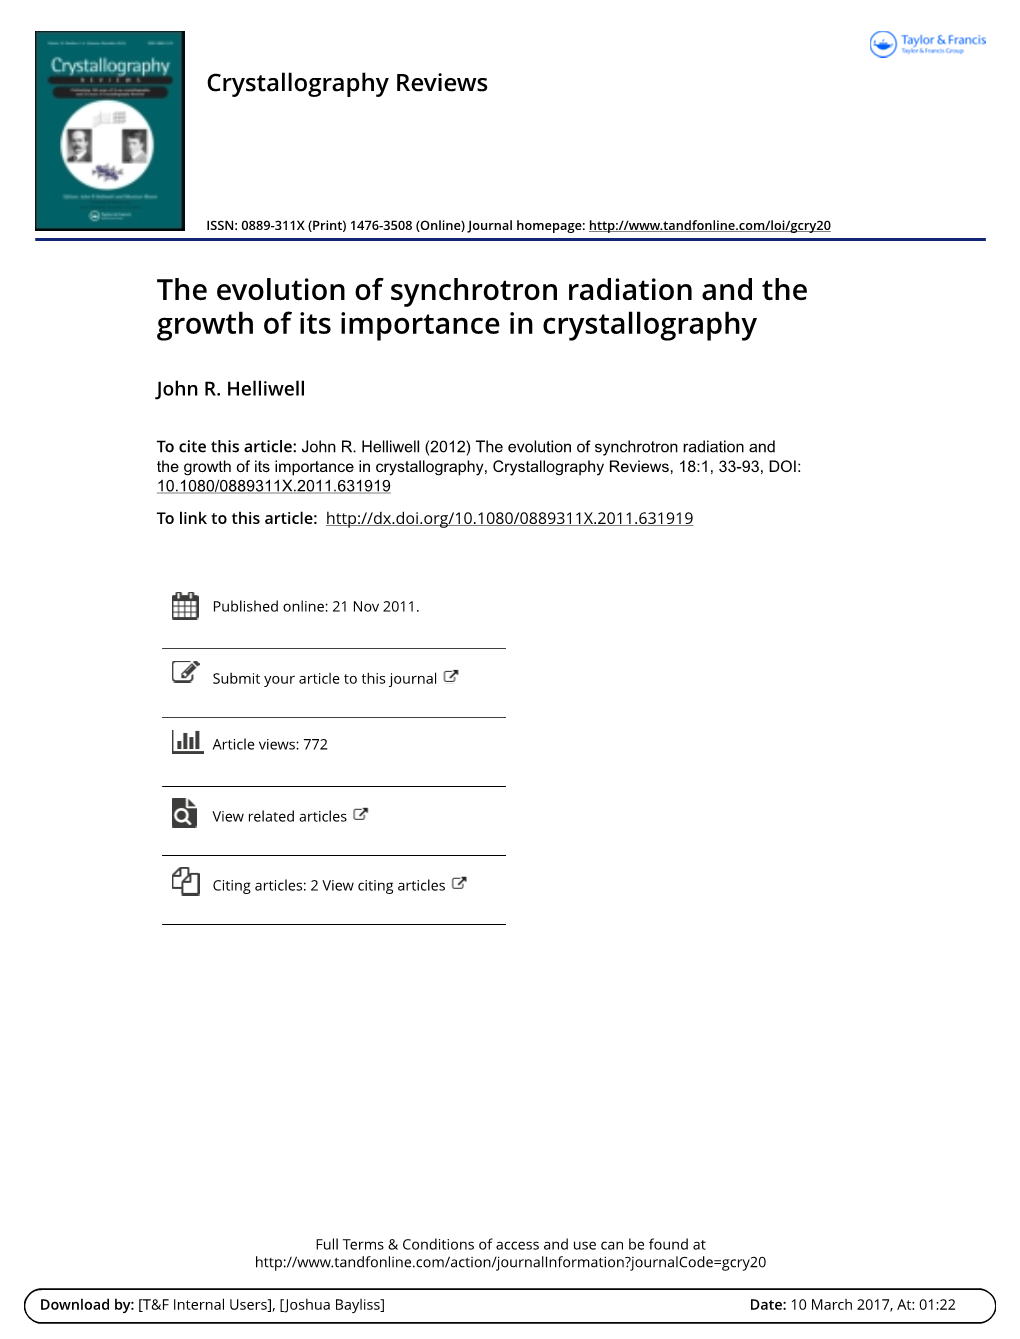 The Evolution of Synchrotron Radiation and the Growth of Its Importance in Crystallography